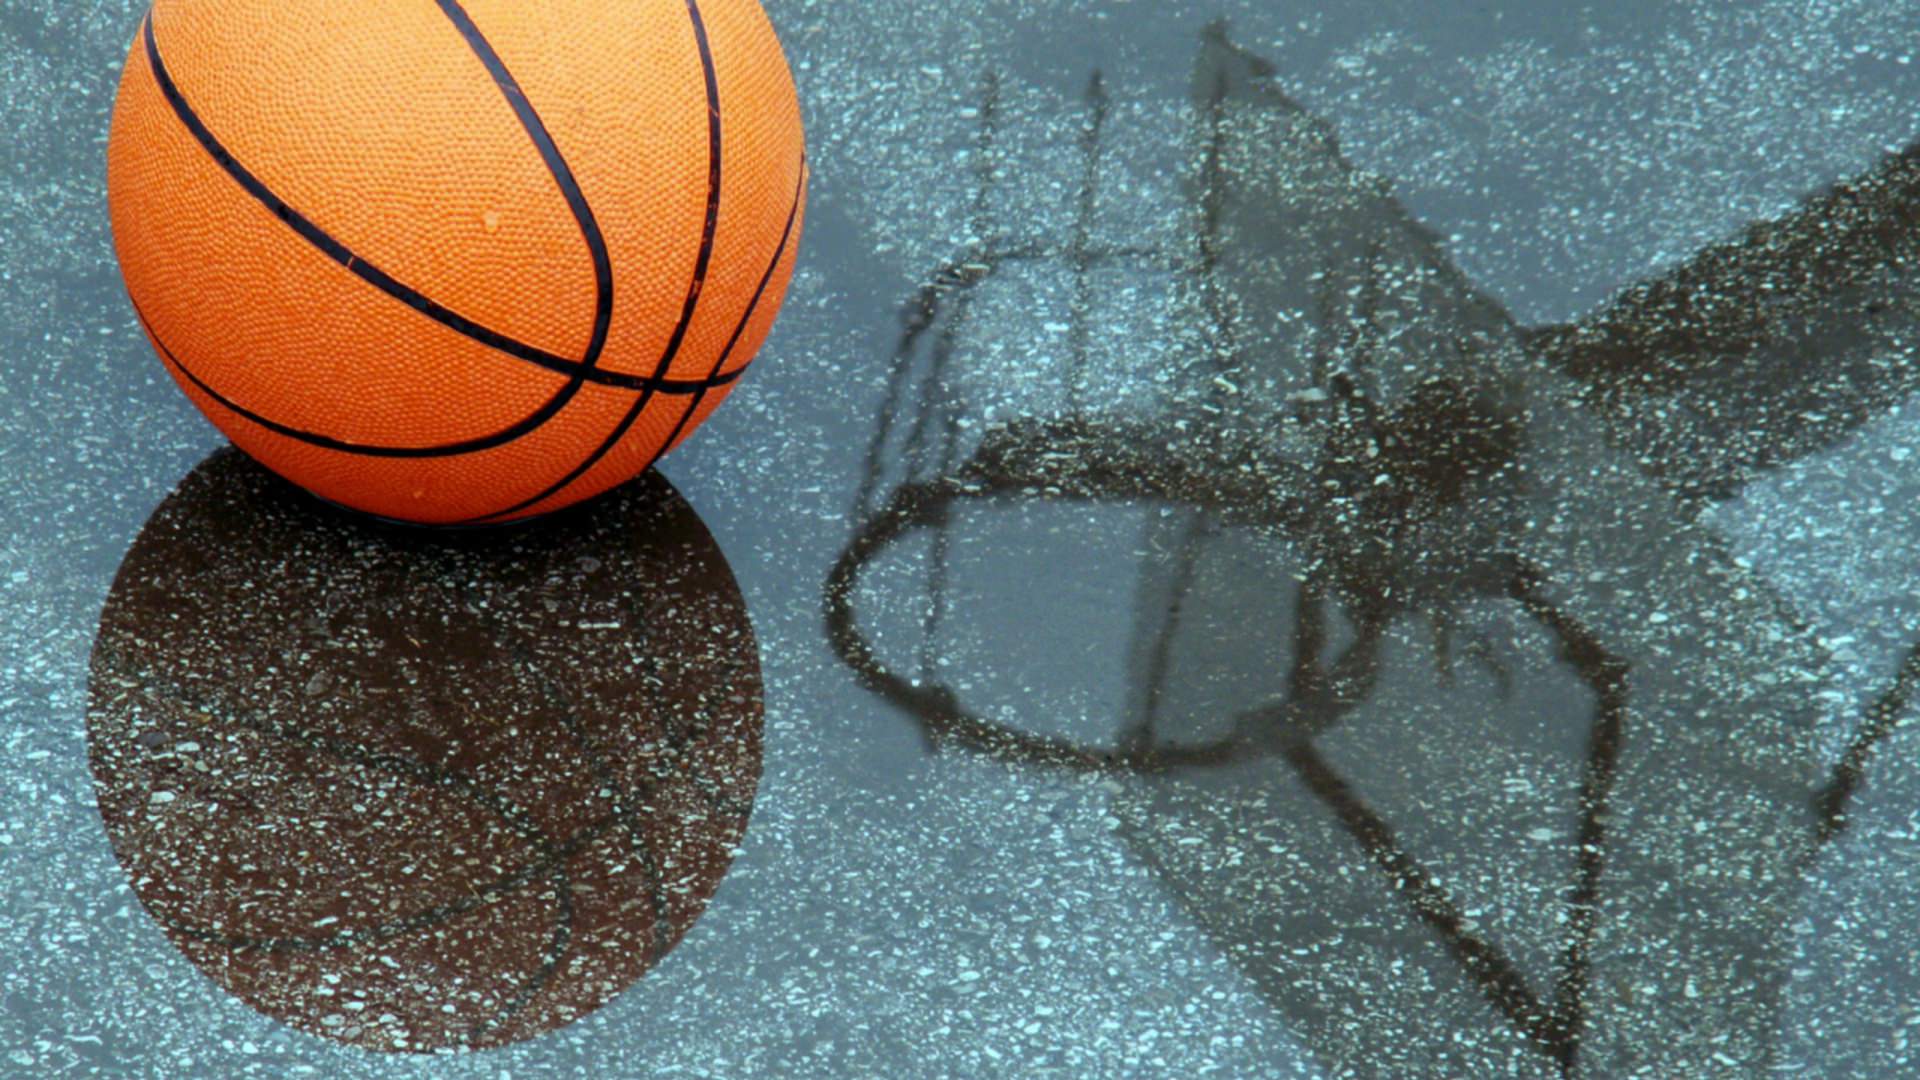 30+ Basketball Backgrounds, Wallpapers, Images, Pictures 